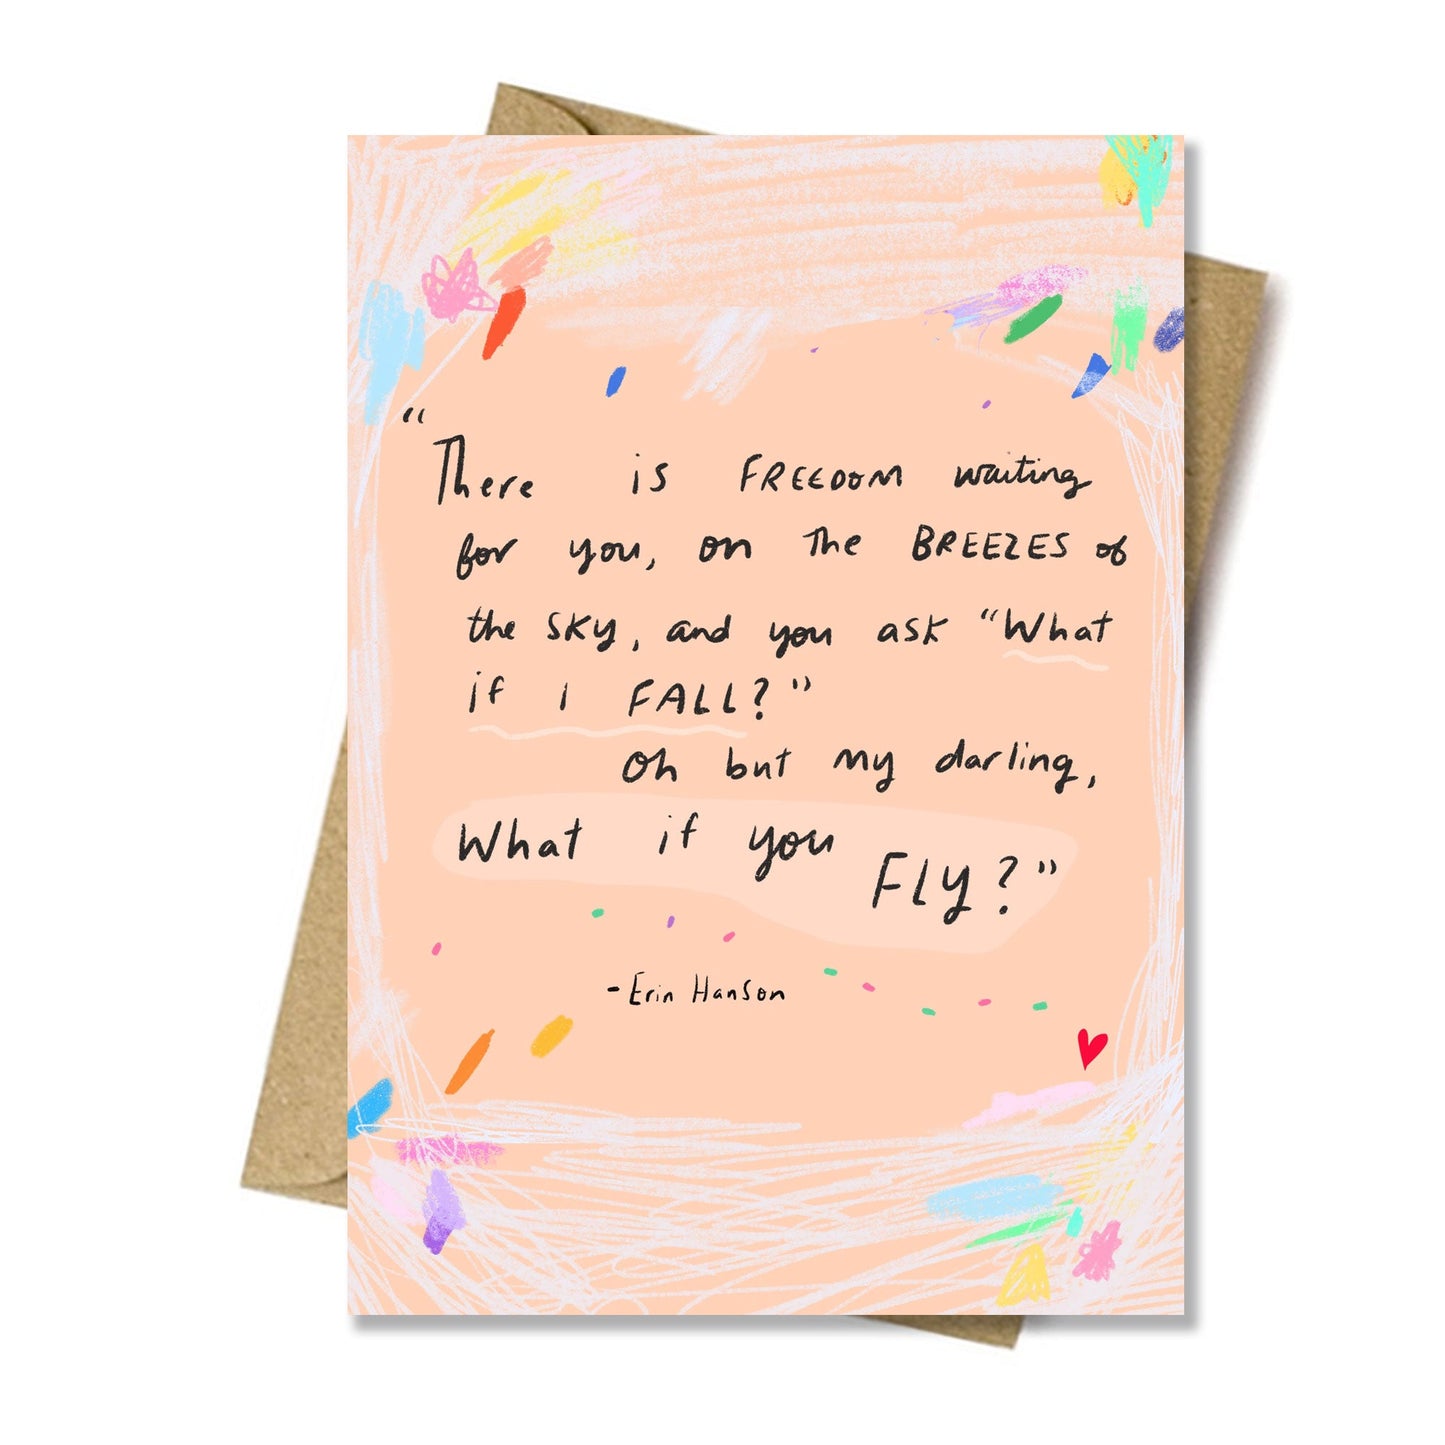 What if you fly? card